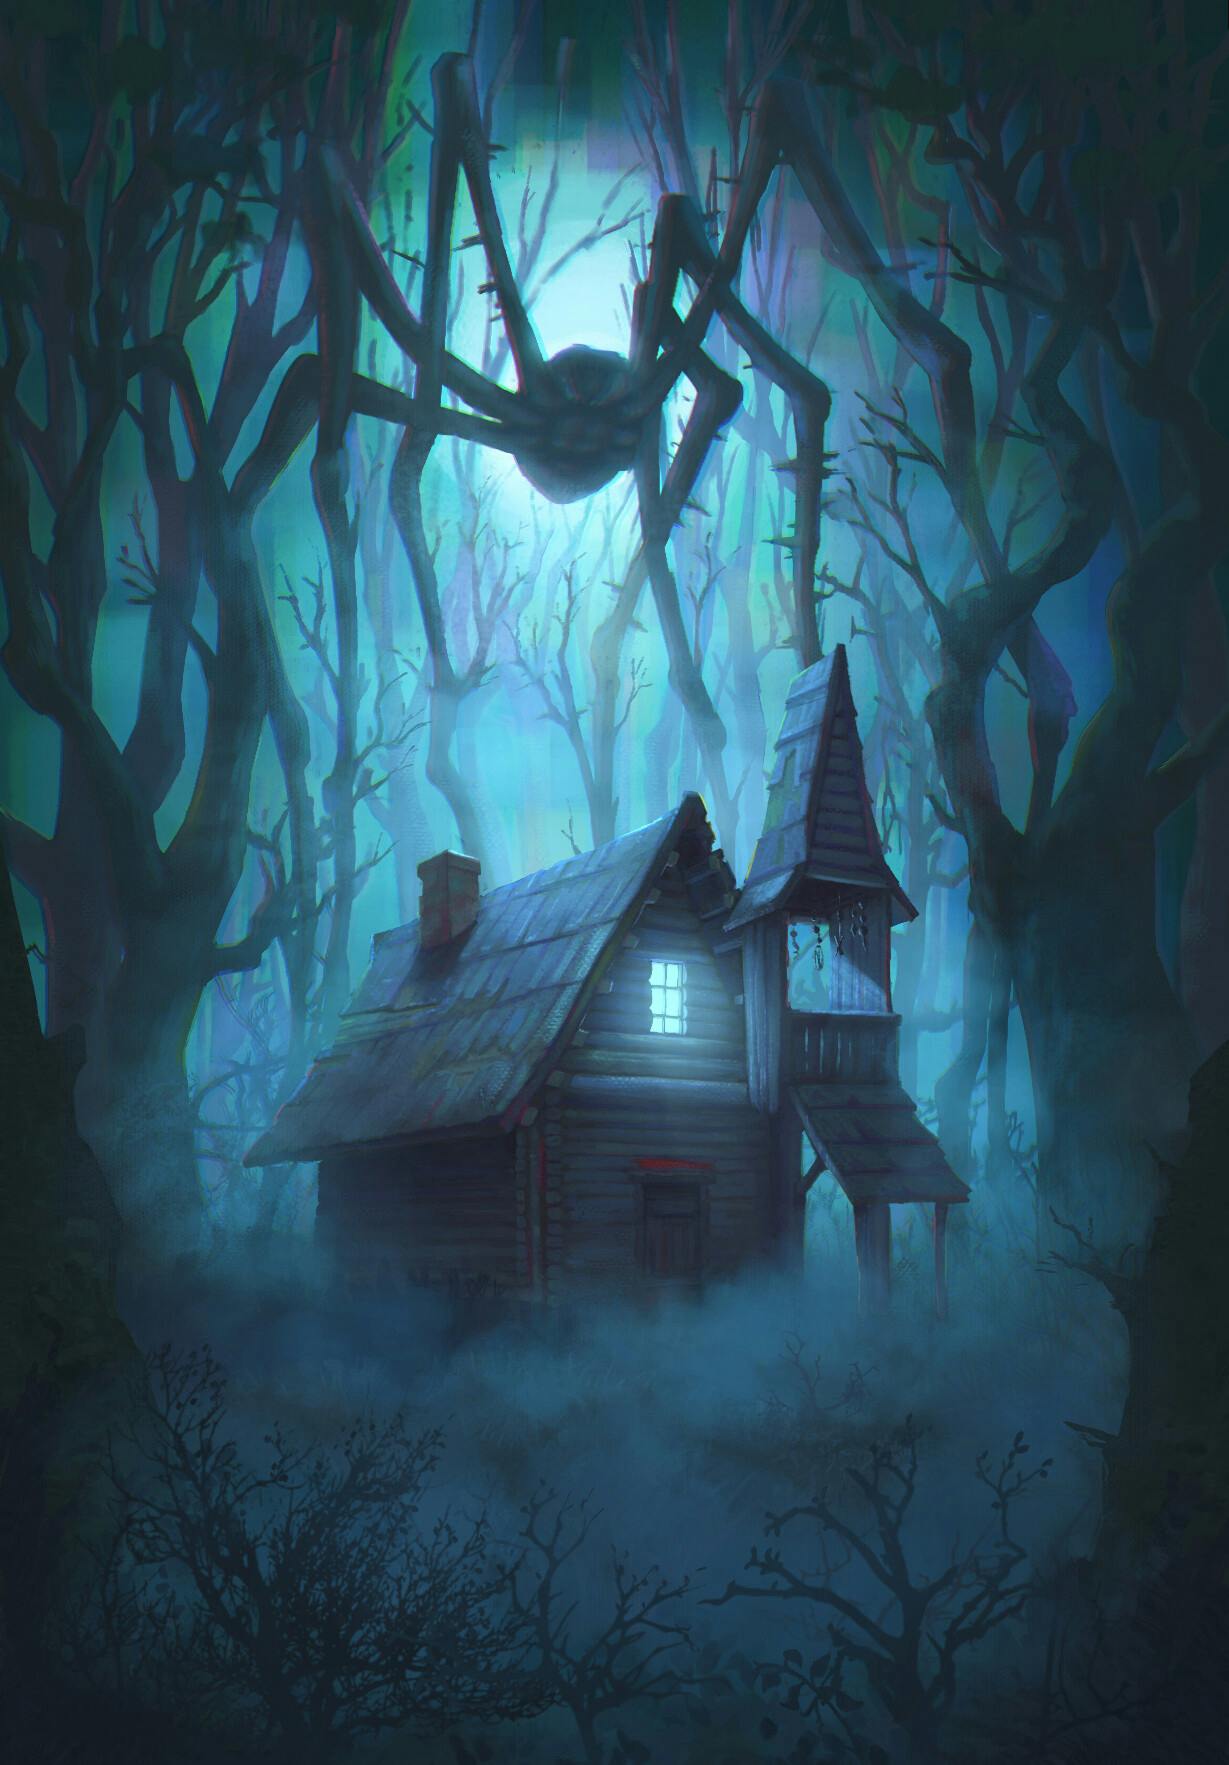 A giant spider over a spooky house